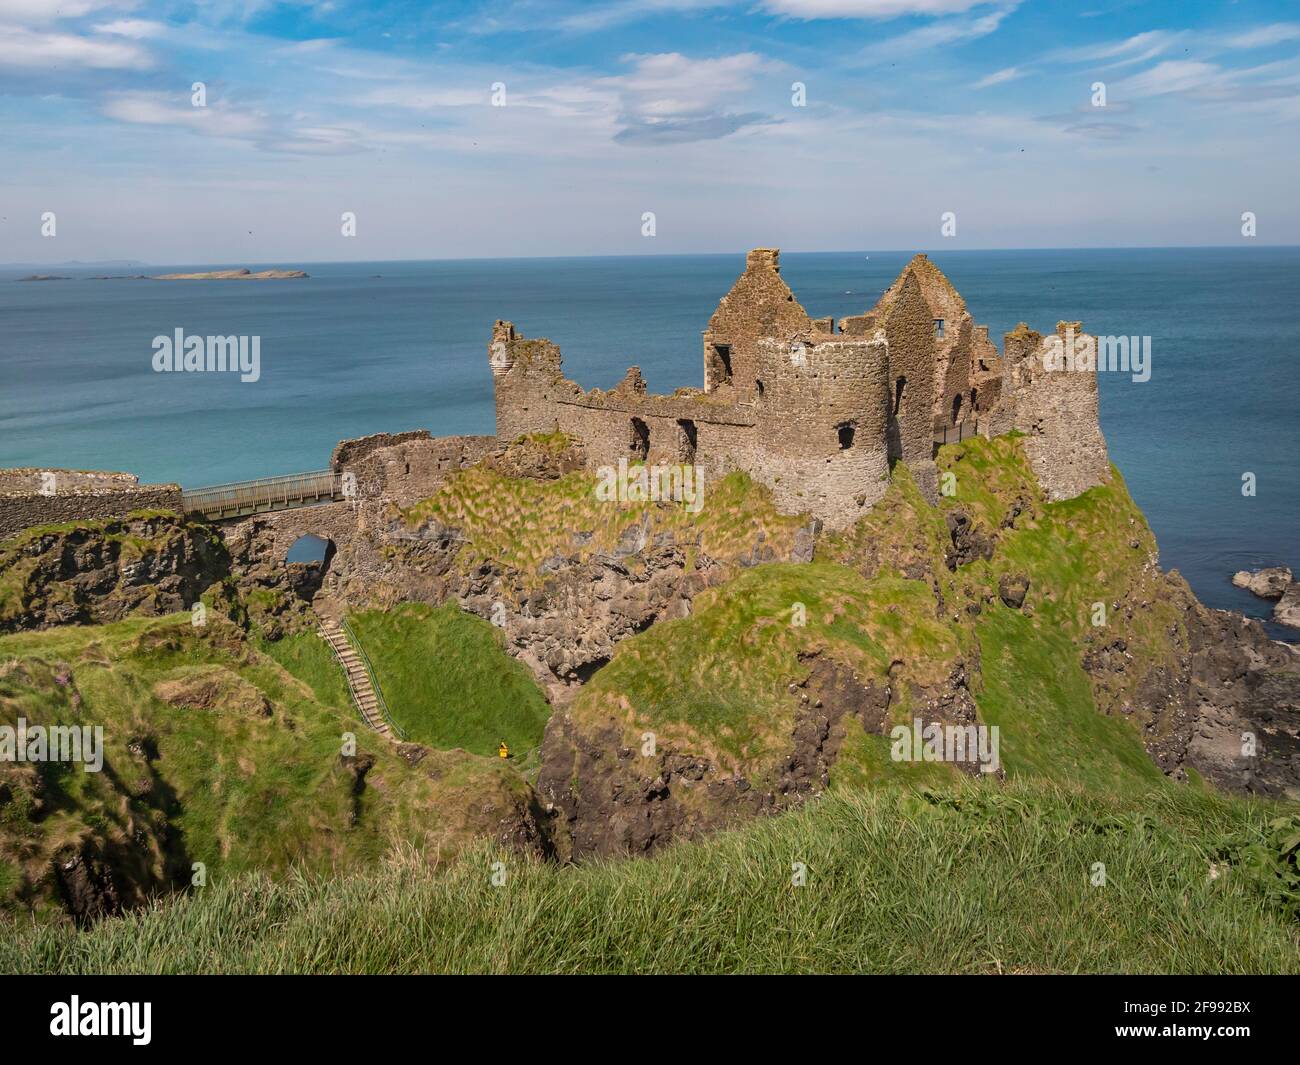 Dunluce Castle in Northern Ireland - a famous movie location - travel photography Stock Photo